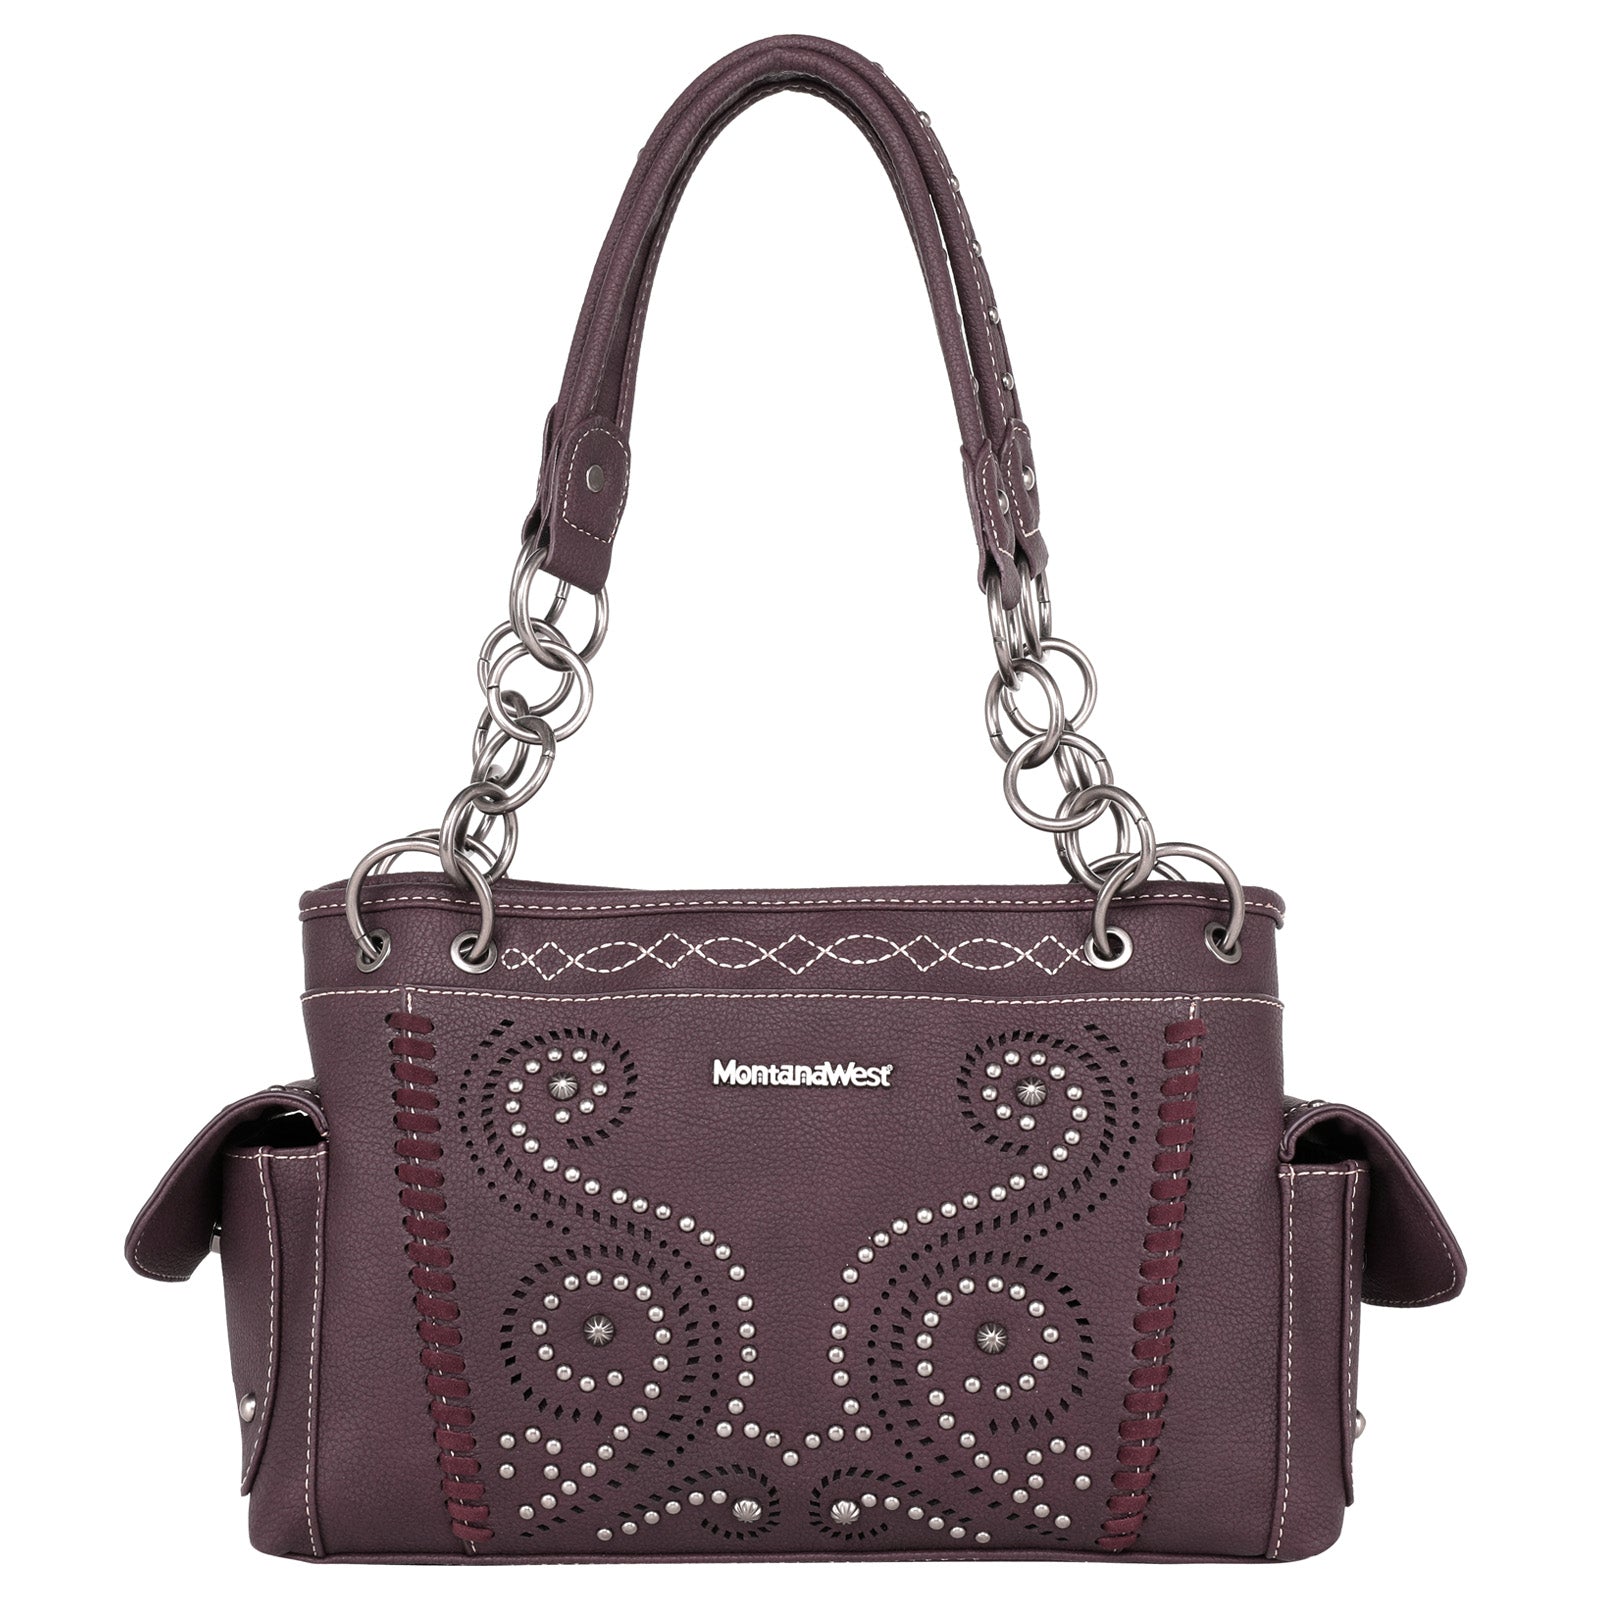 Montana West Laser Cut-out Swirl Concealed Carry Satchel - Montana West World